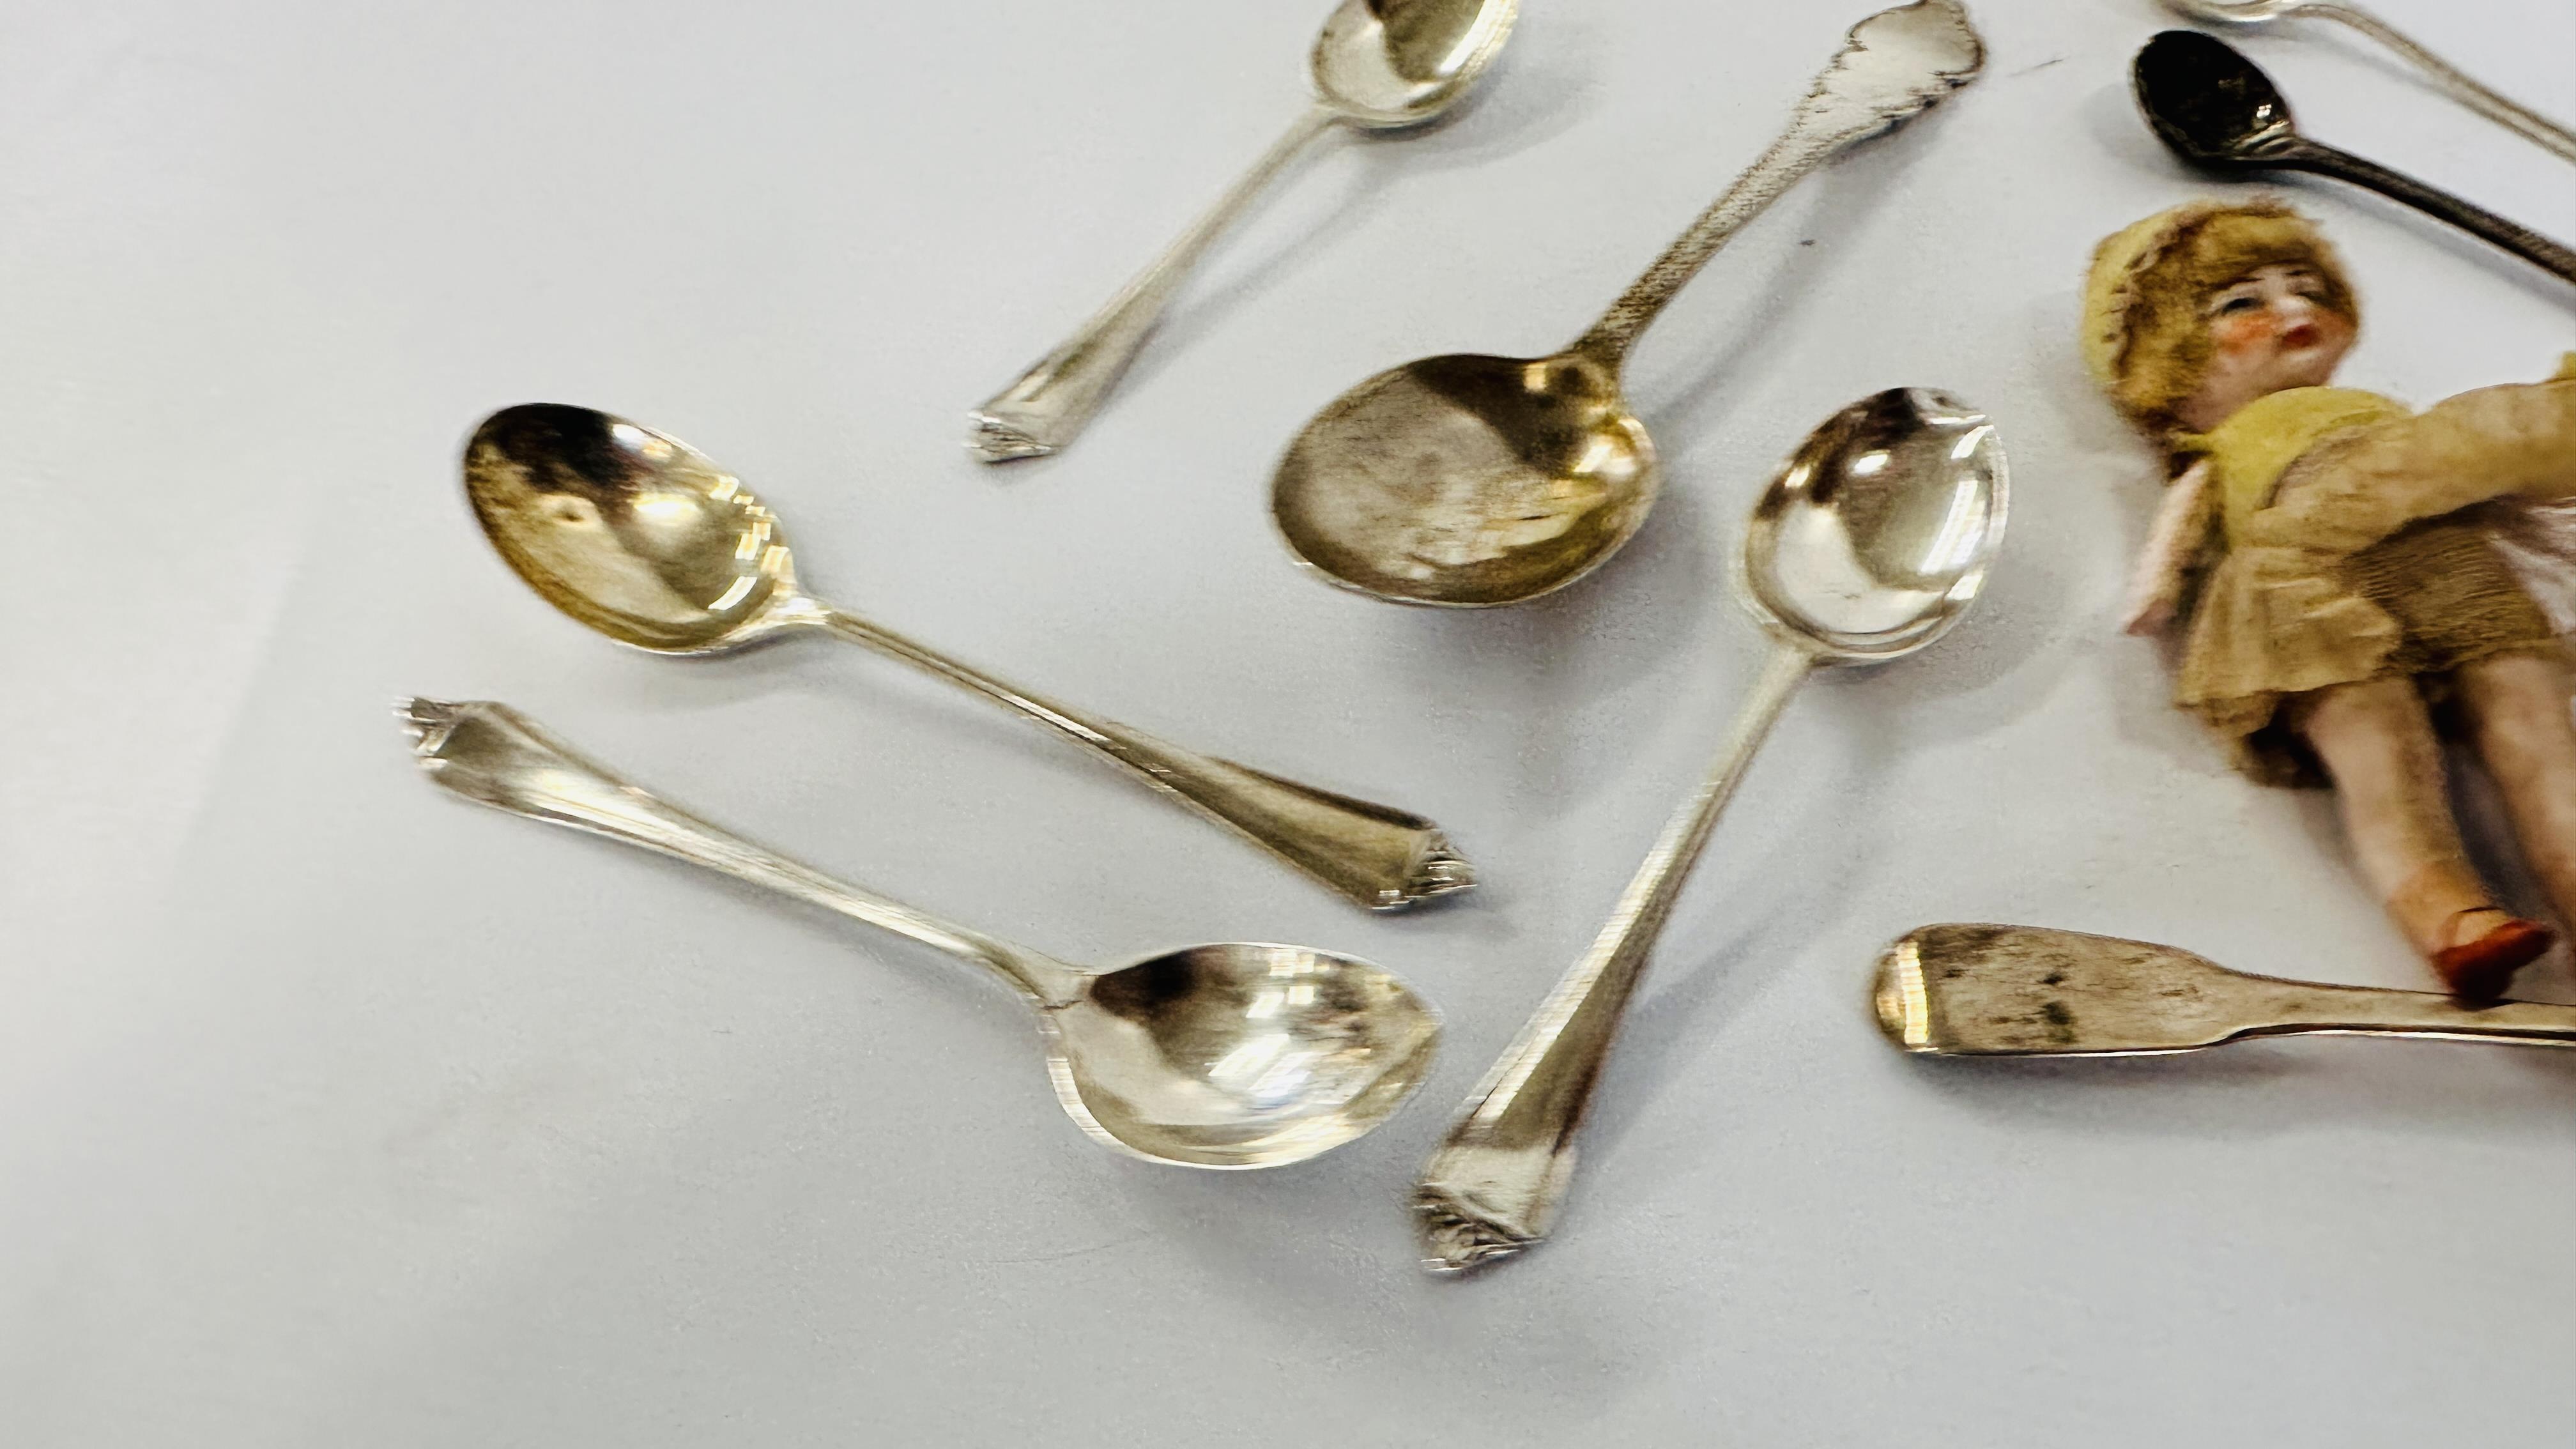 A GROUP OF 8 ASSORTED SILVER SPOONS, GILT SPIDER BROOCH ETC. AND A VINTAGE BISQUE MINIATURE DOLL. - Image 5 of 8